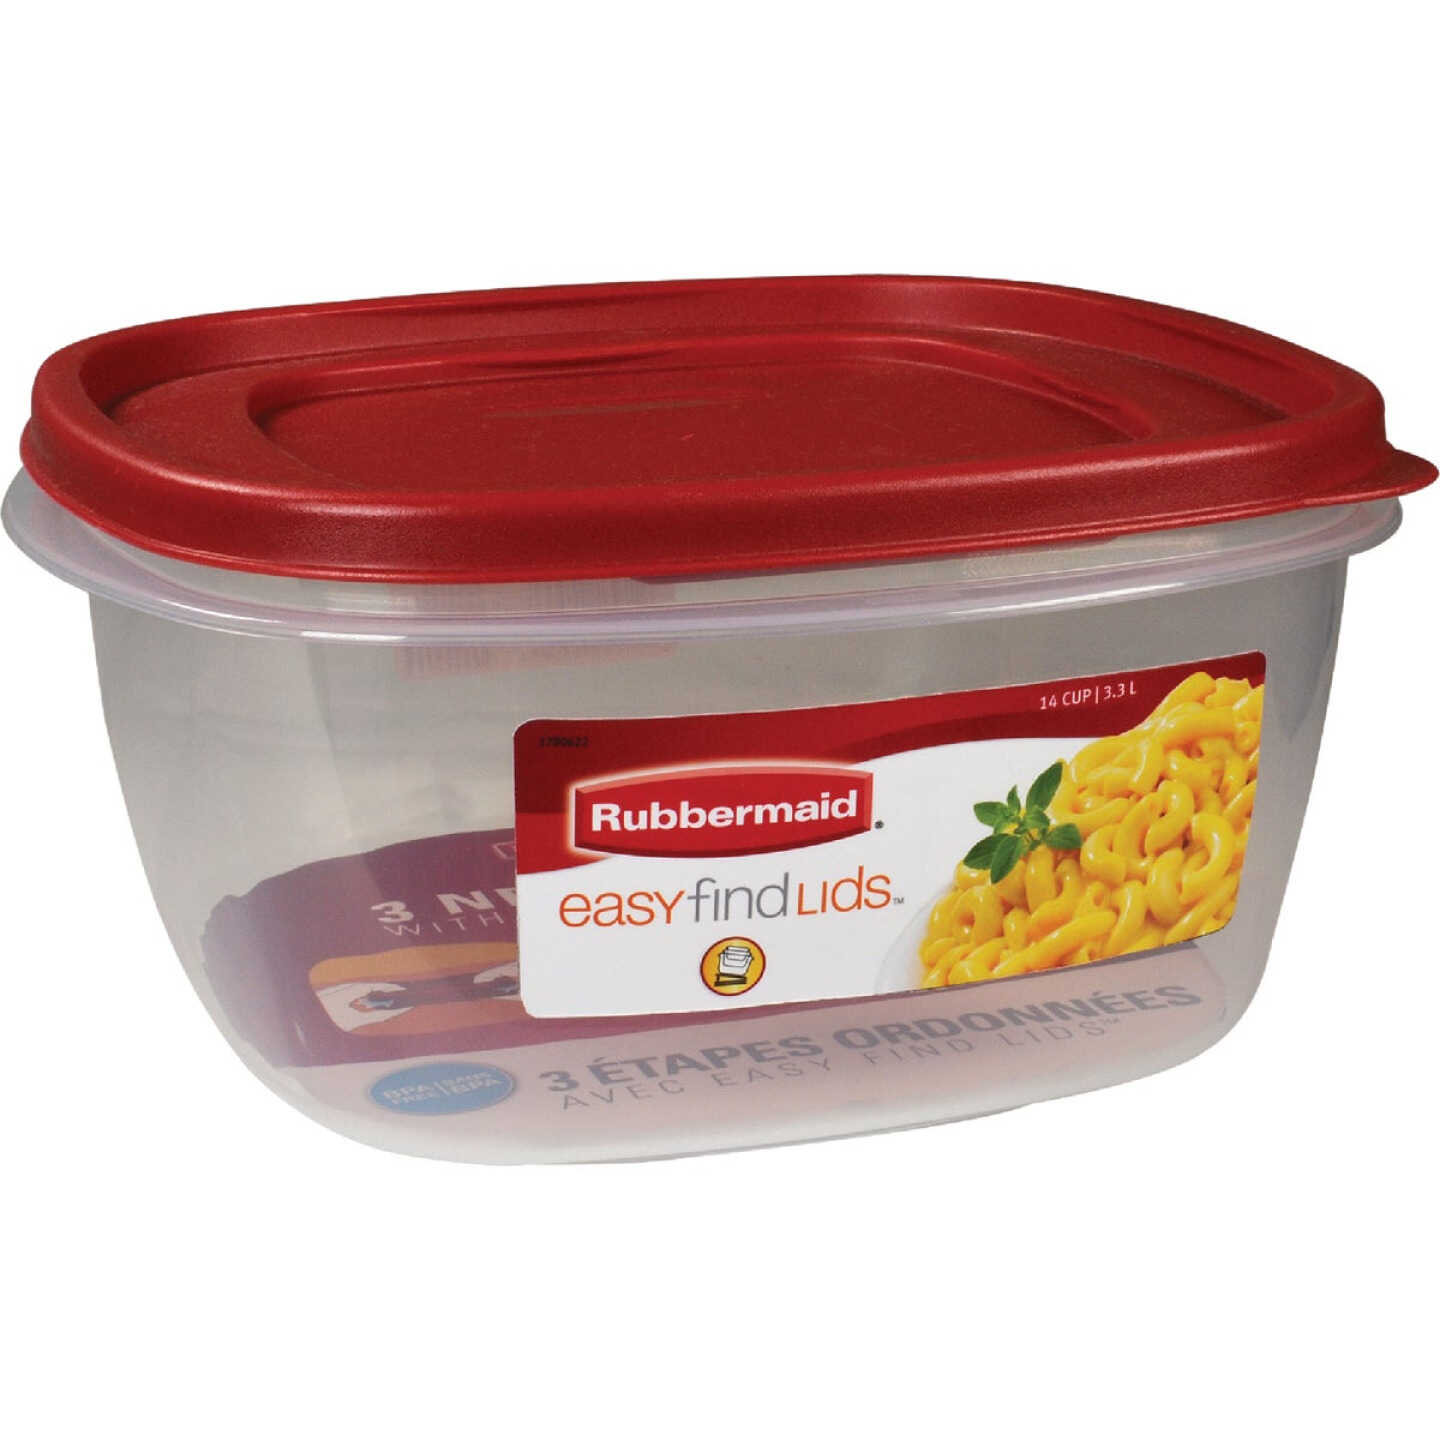 Rubbermaid 4pc Easy Find Lids Food Storage Containers Red